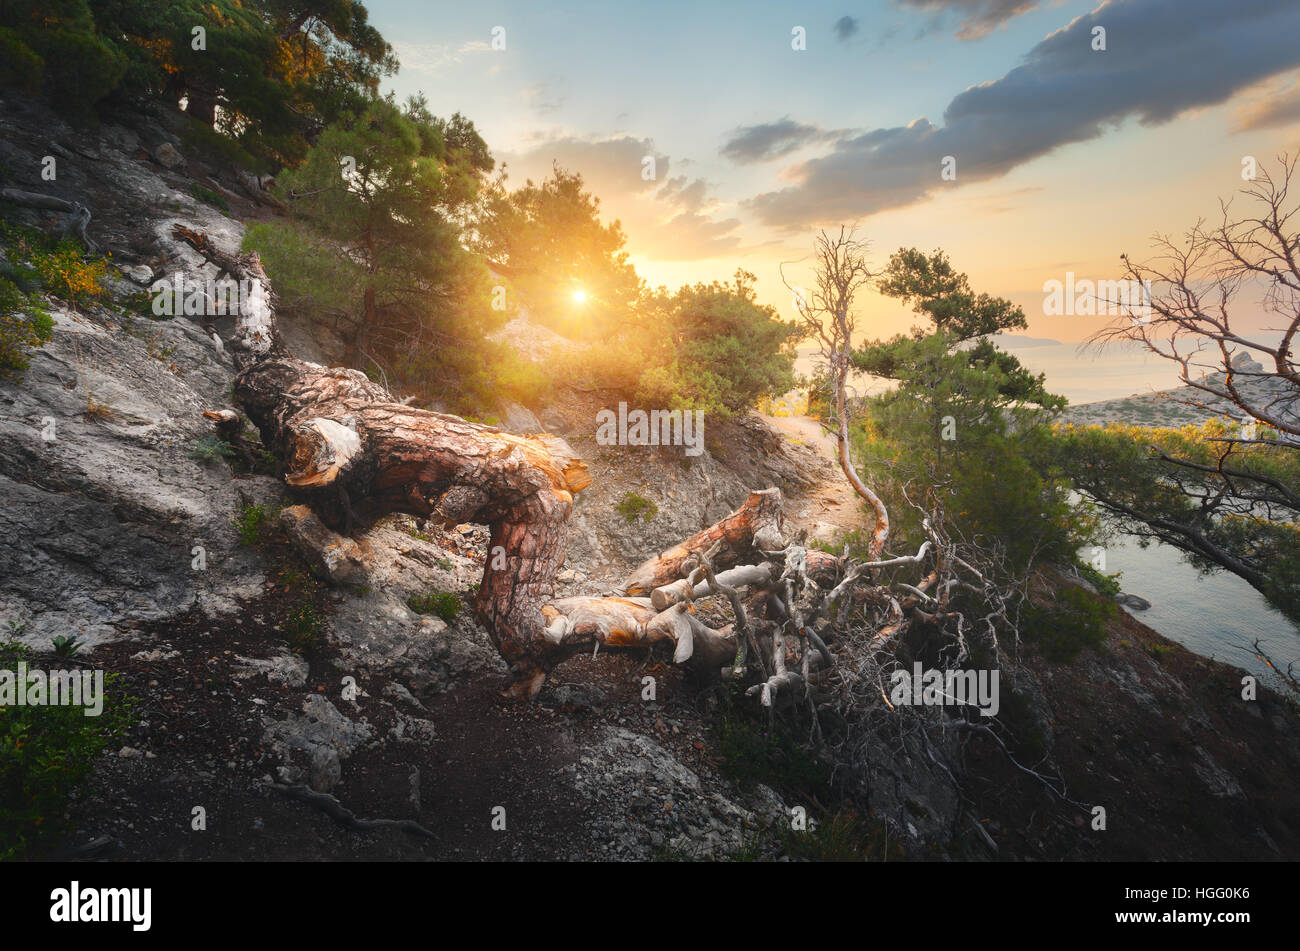 Fallen old tree in mountains at colorful sunrise. Landscape with trees, trail, mountain, sea, and sunny sky. Mountain forest Stock Photo